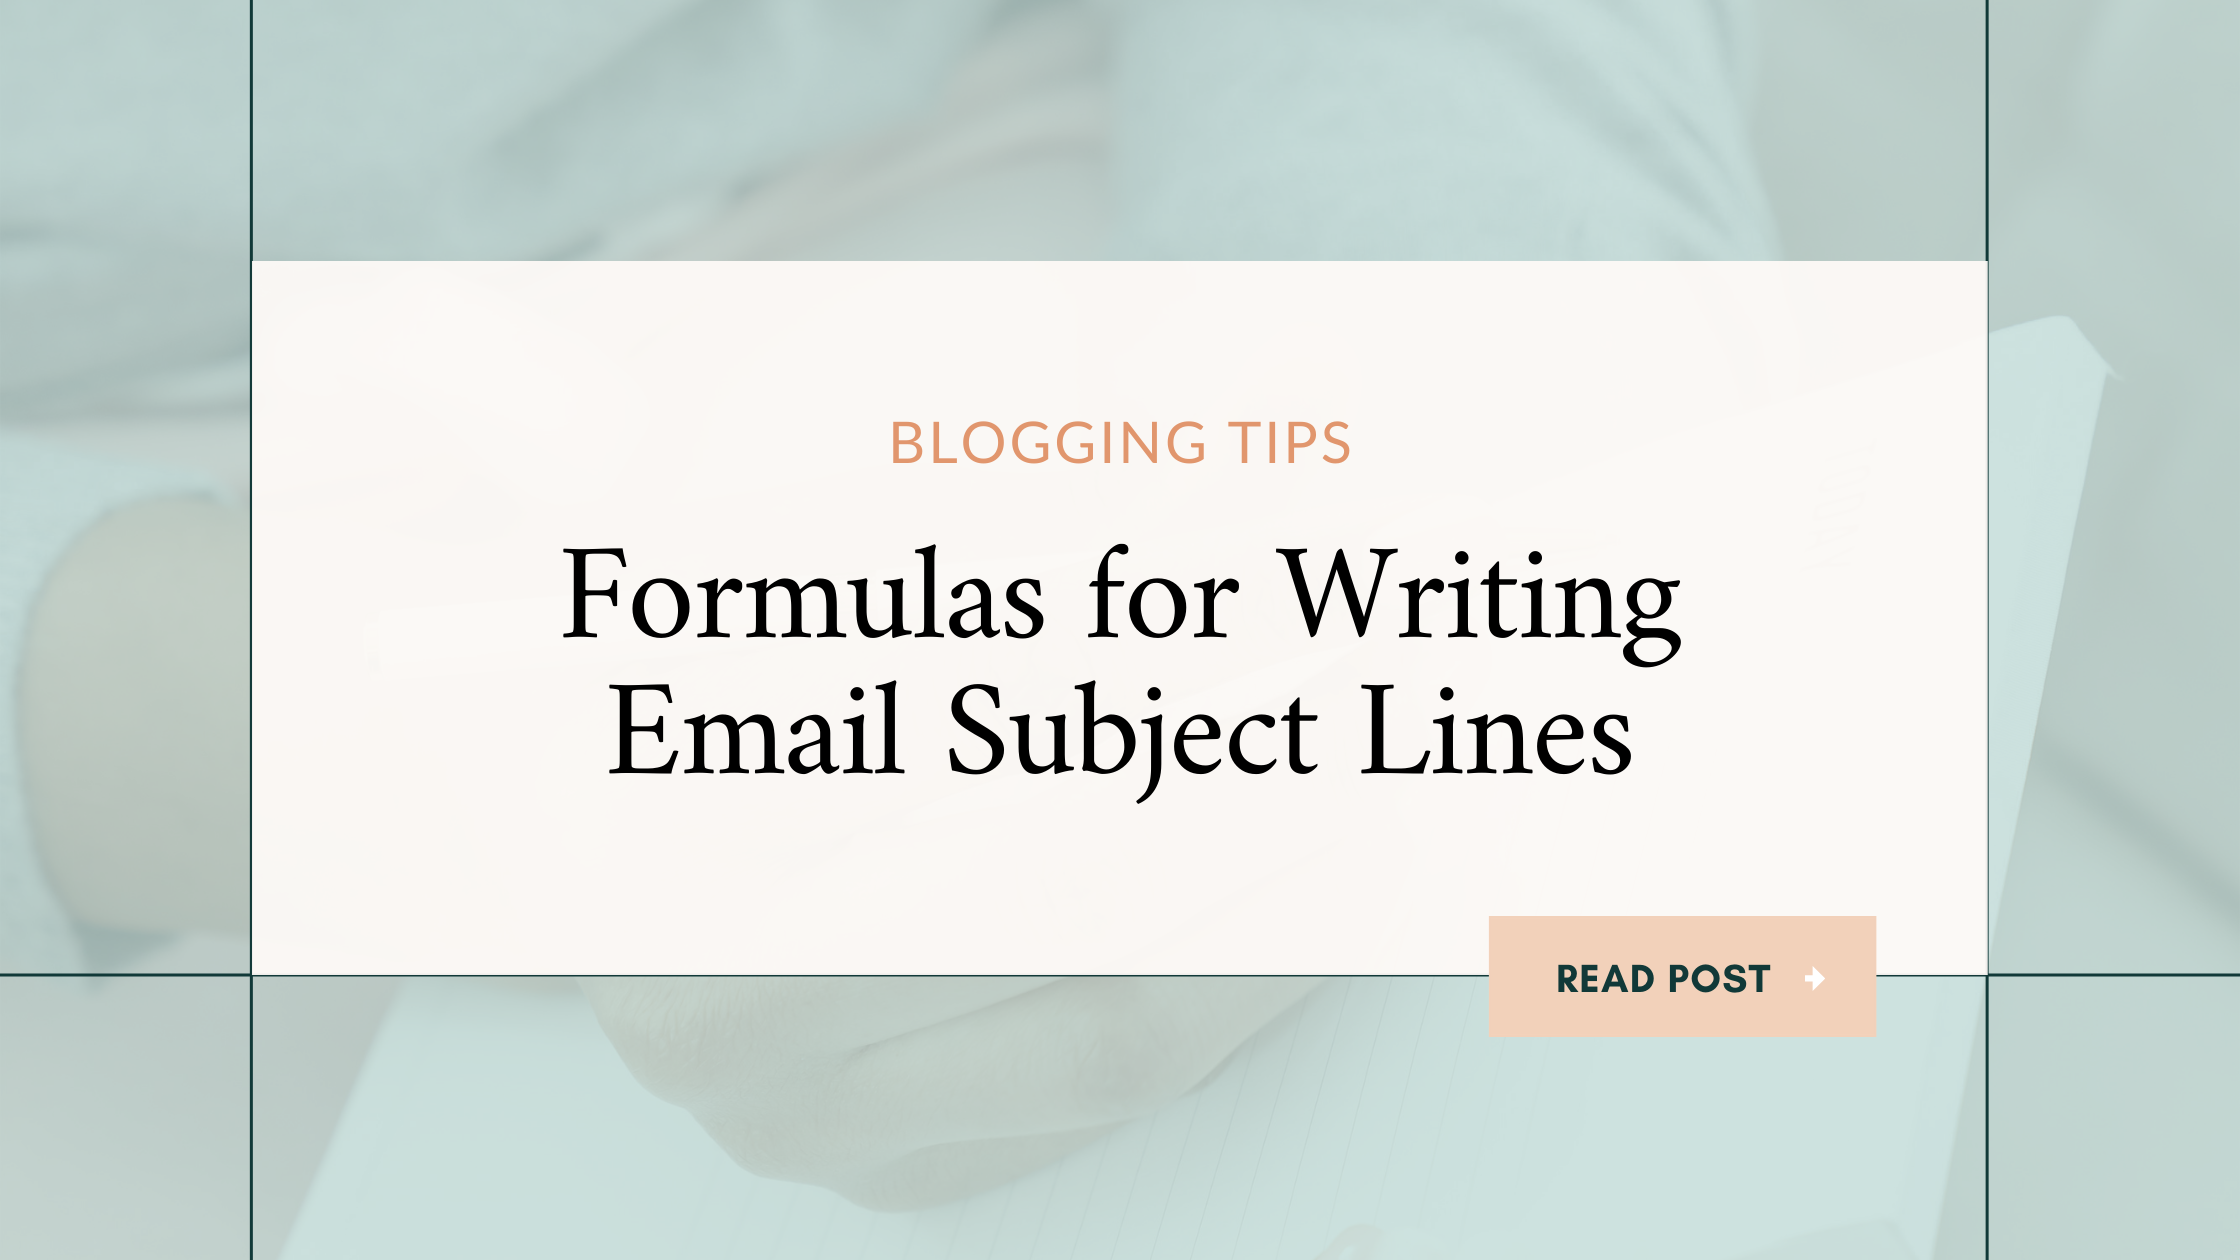 Formulas for Writing Catchy Subject Lines to Get Your Emails Opened